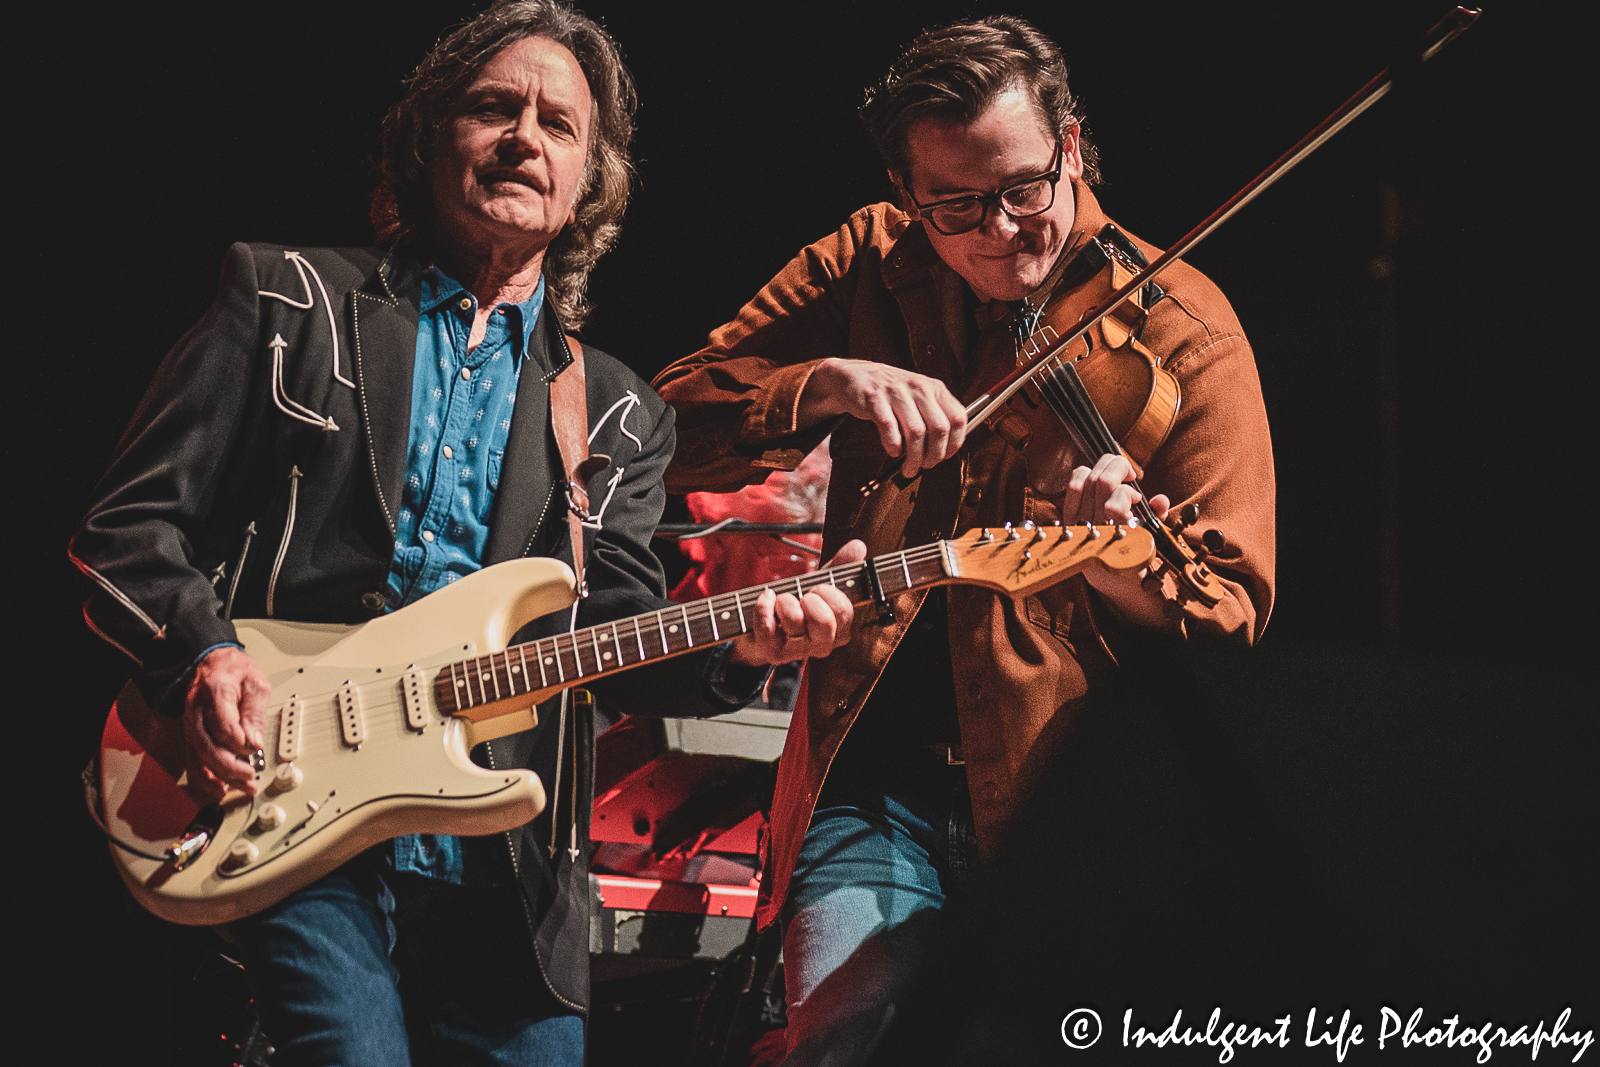 Jeff Hanna and Ross Holmes of Nitty Gritty Dirt Band performing together at Ameristar Casino's Star Pavilion in Kansas City, MO on July 8, 2023.